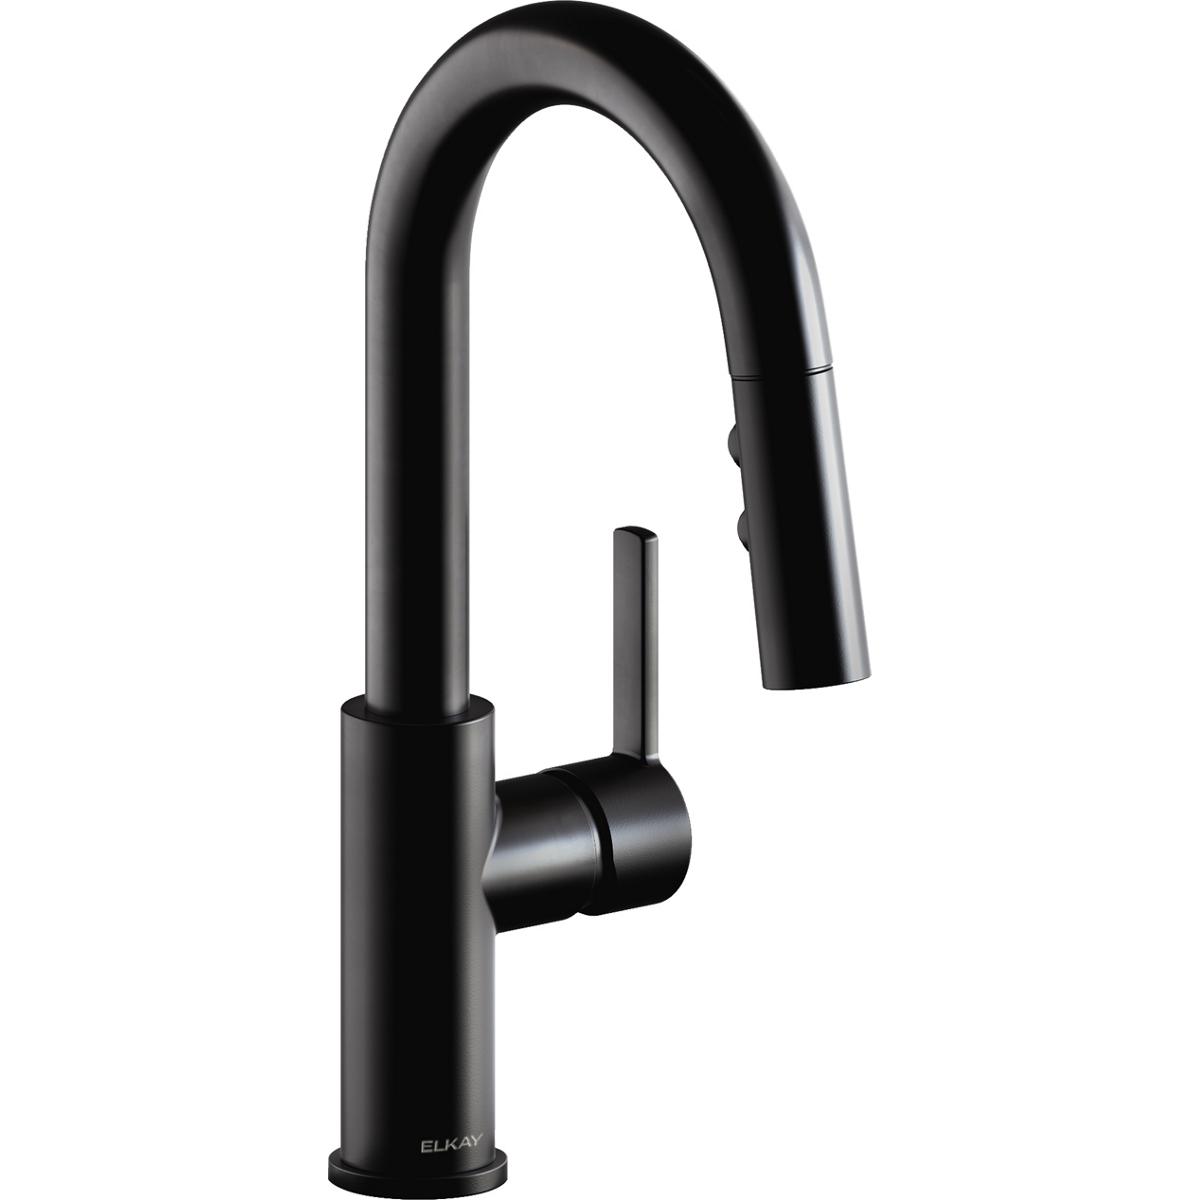 Elkay Avado Single Hole Bar Faucet with Pull-down Spray and Lever Handle